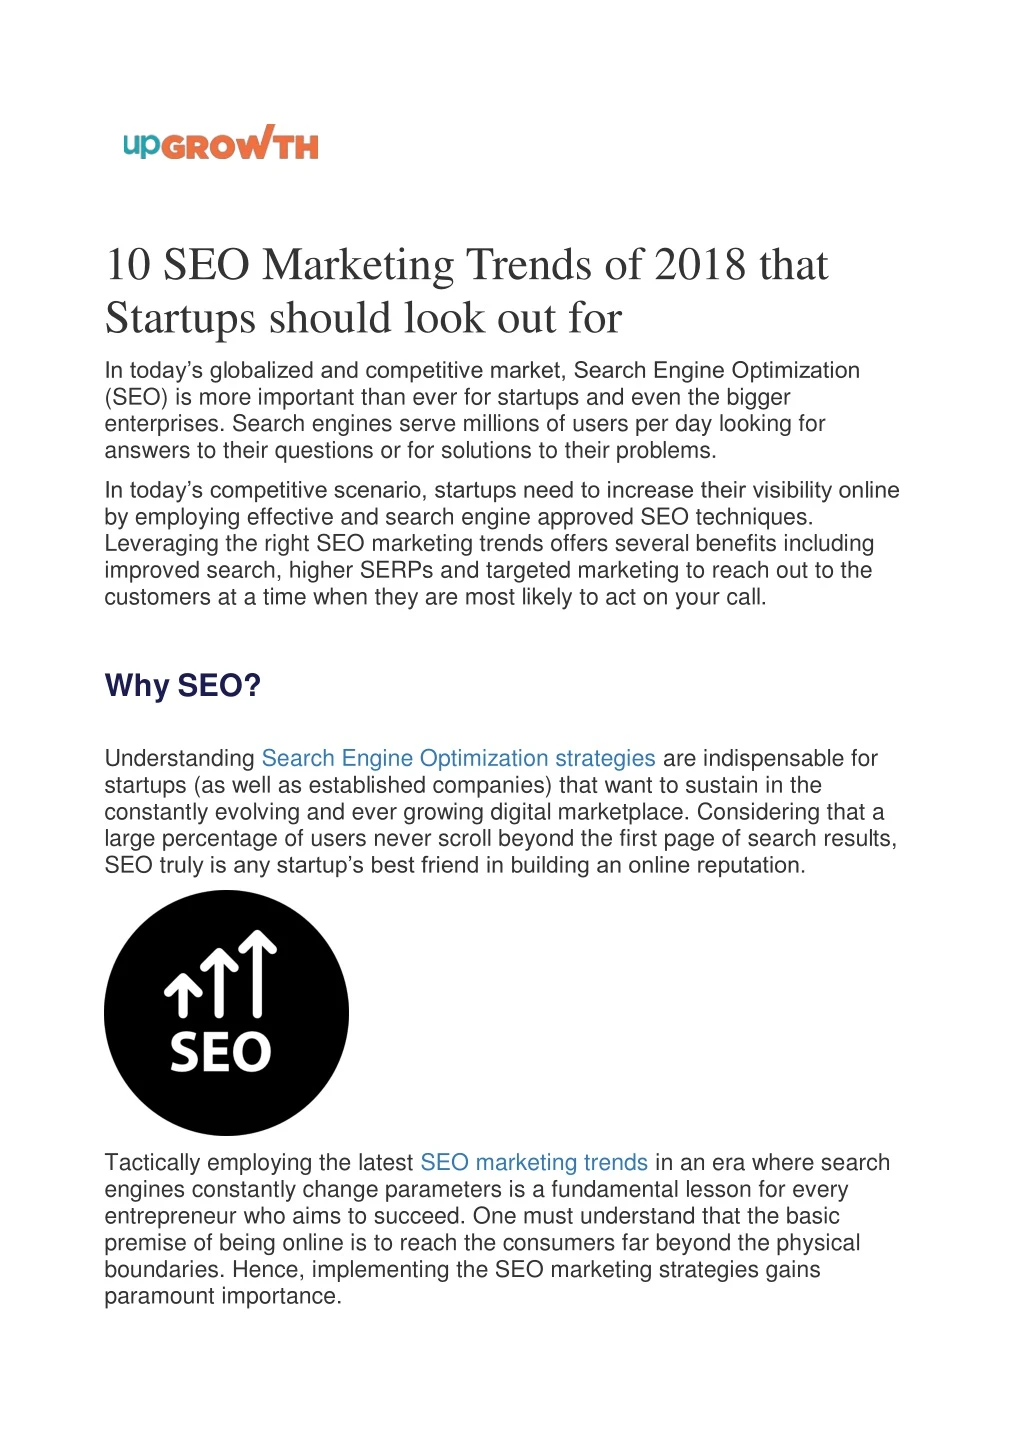 10 seo marketing trends of 2018 that startups